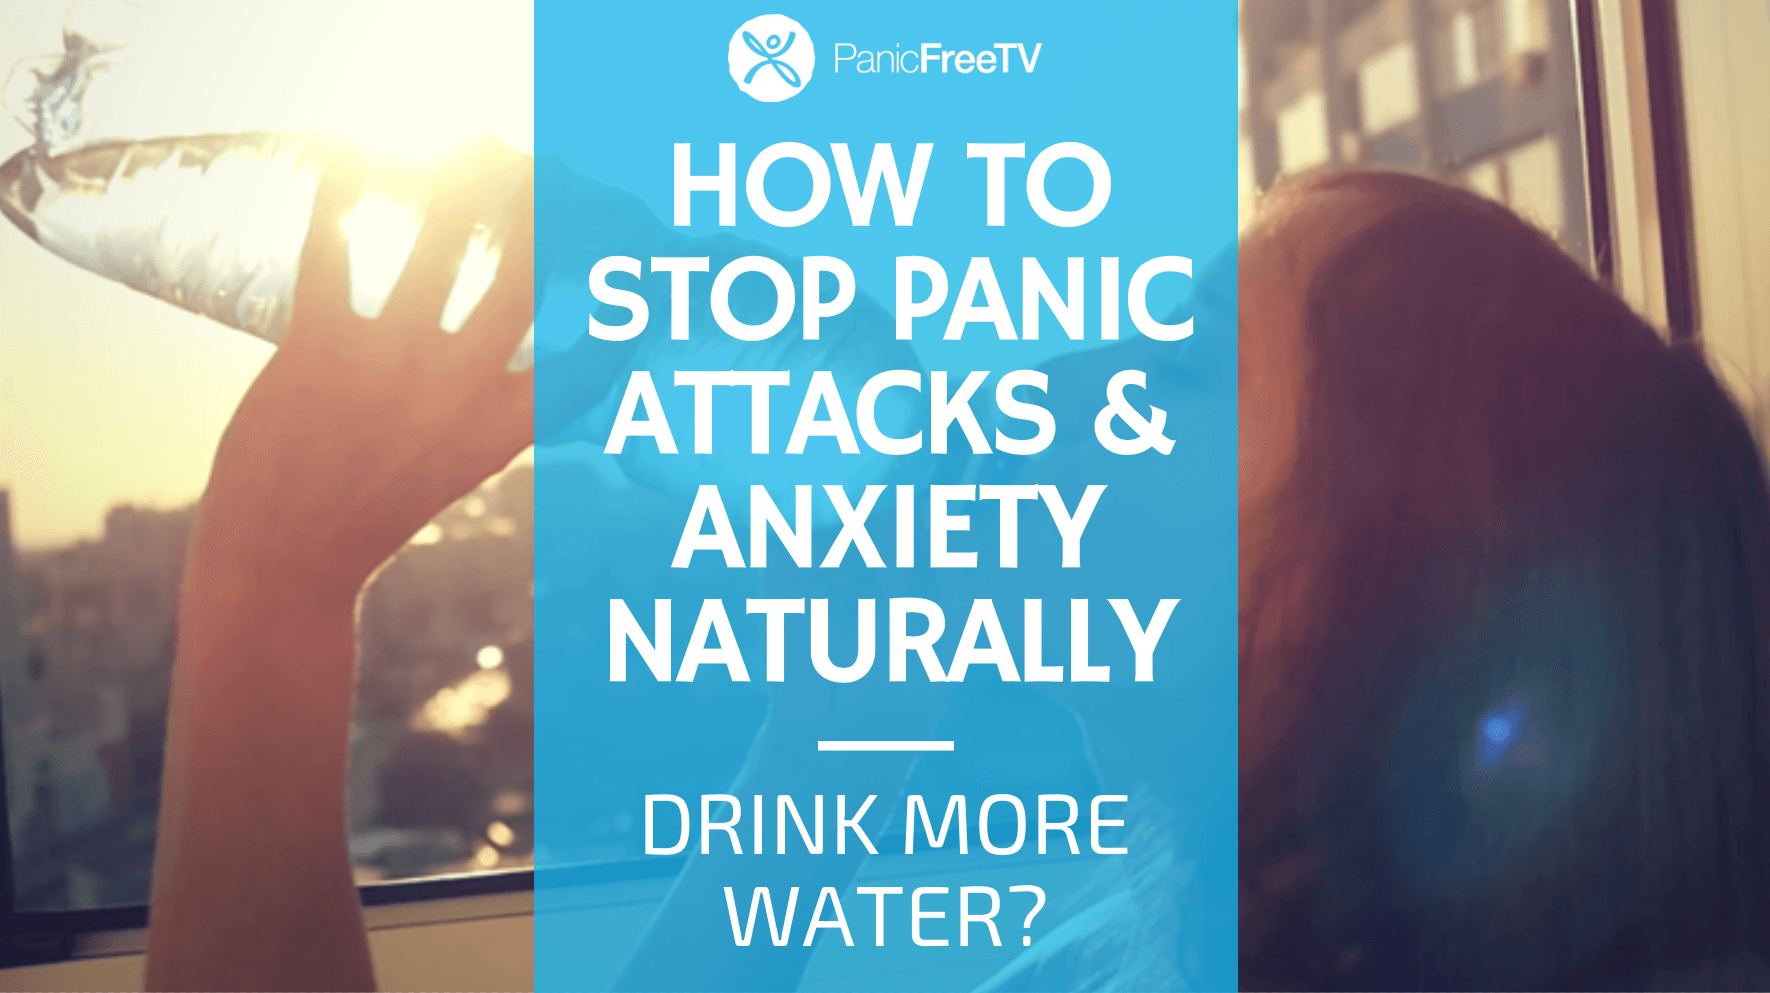 How To Stop Panic Attacks And Anxiety Naturally: Drink More Water?